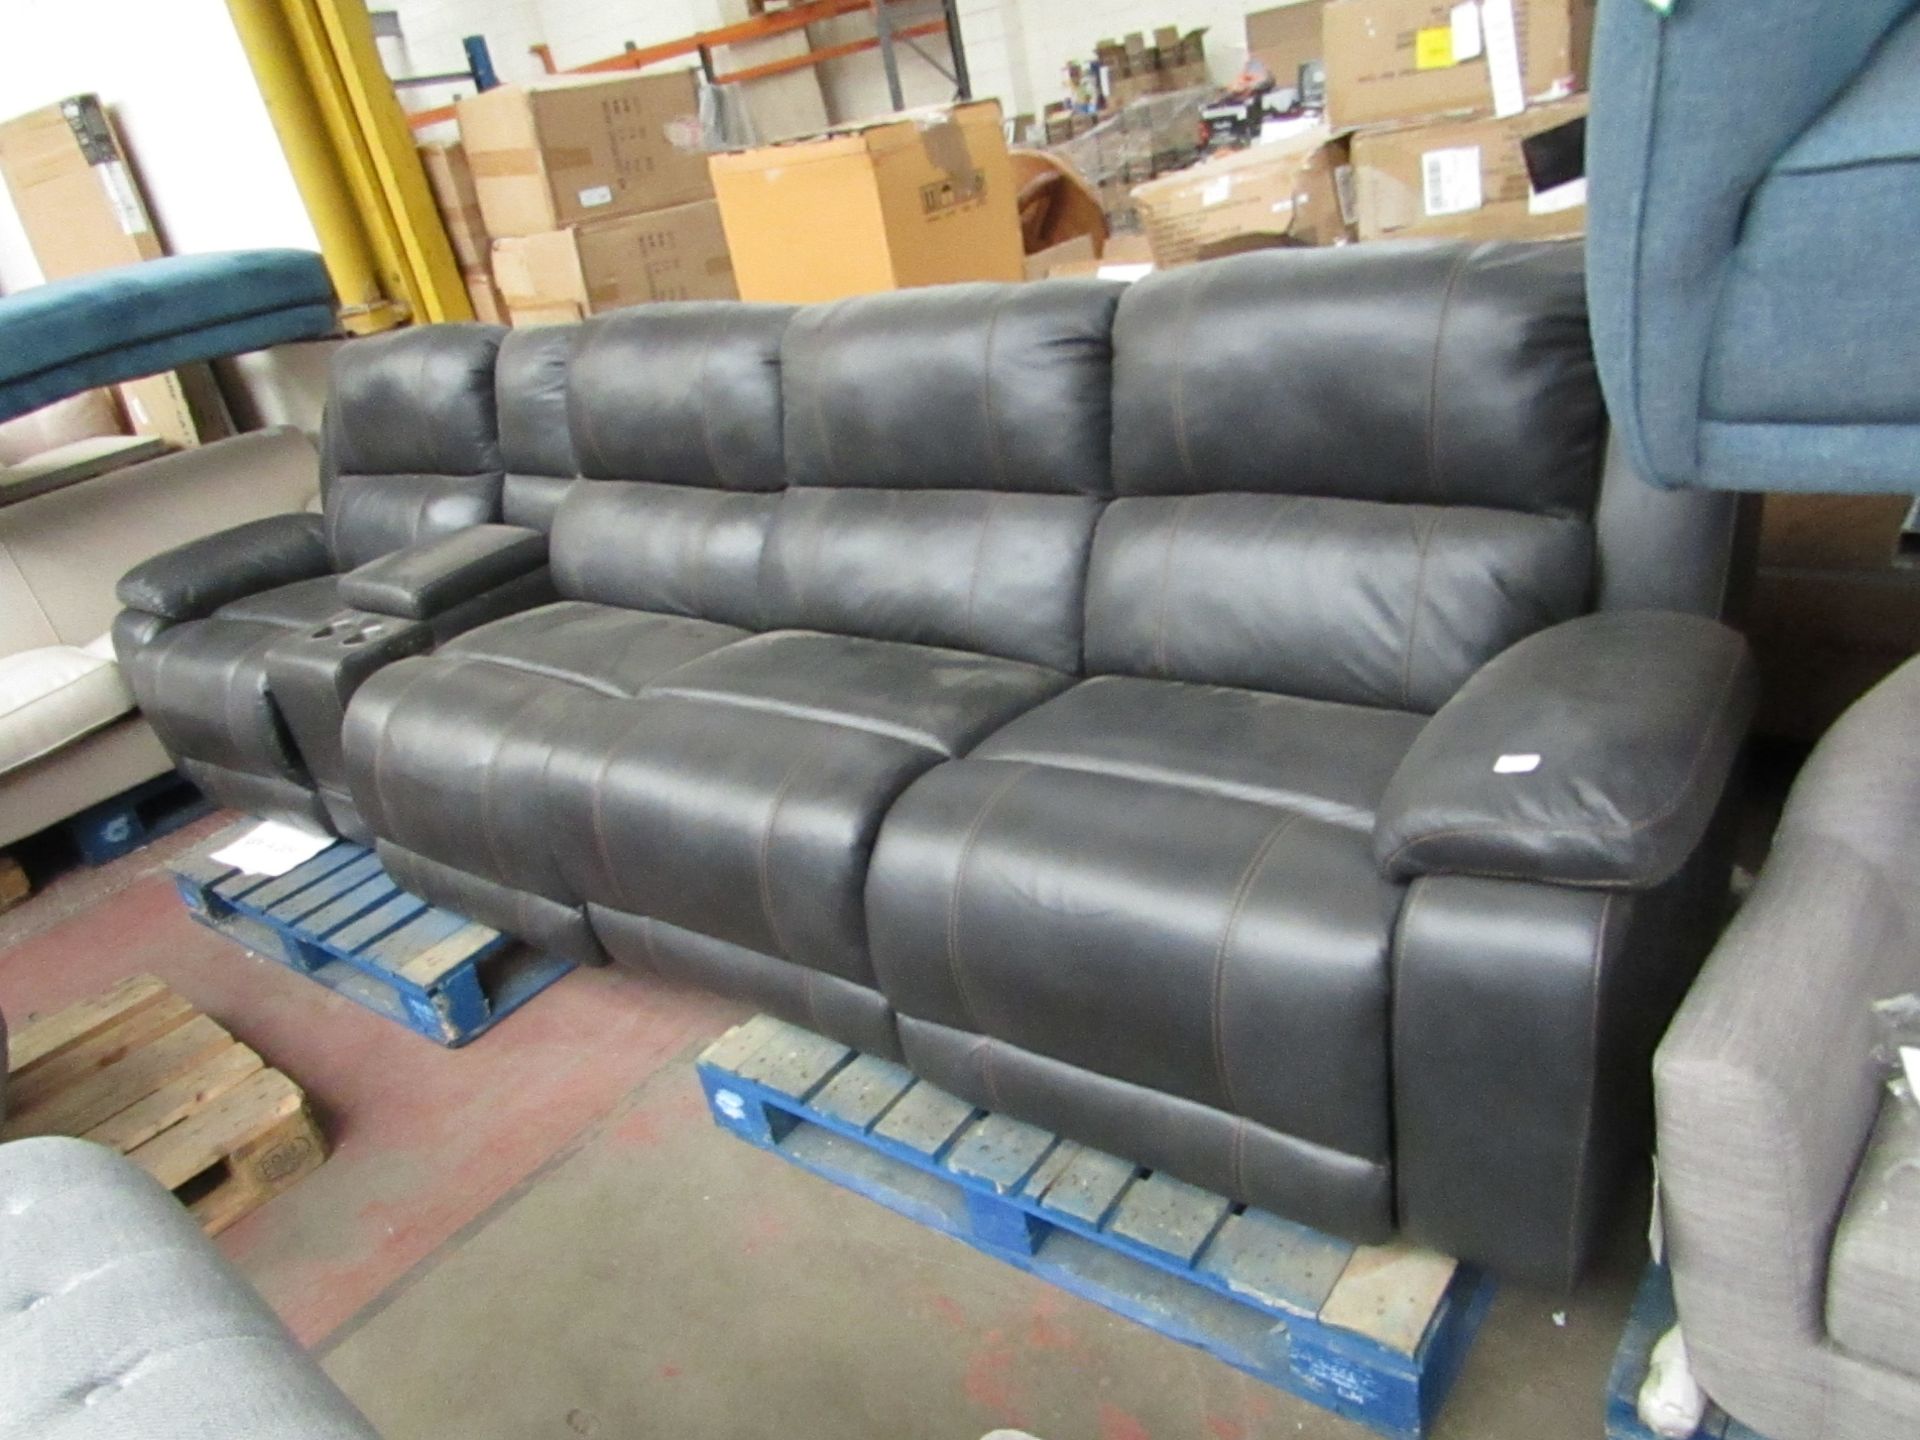 Pulaski leather 5 piece sofa with armrest and recliner, missing corner part but is still